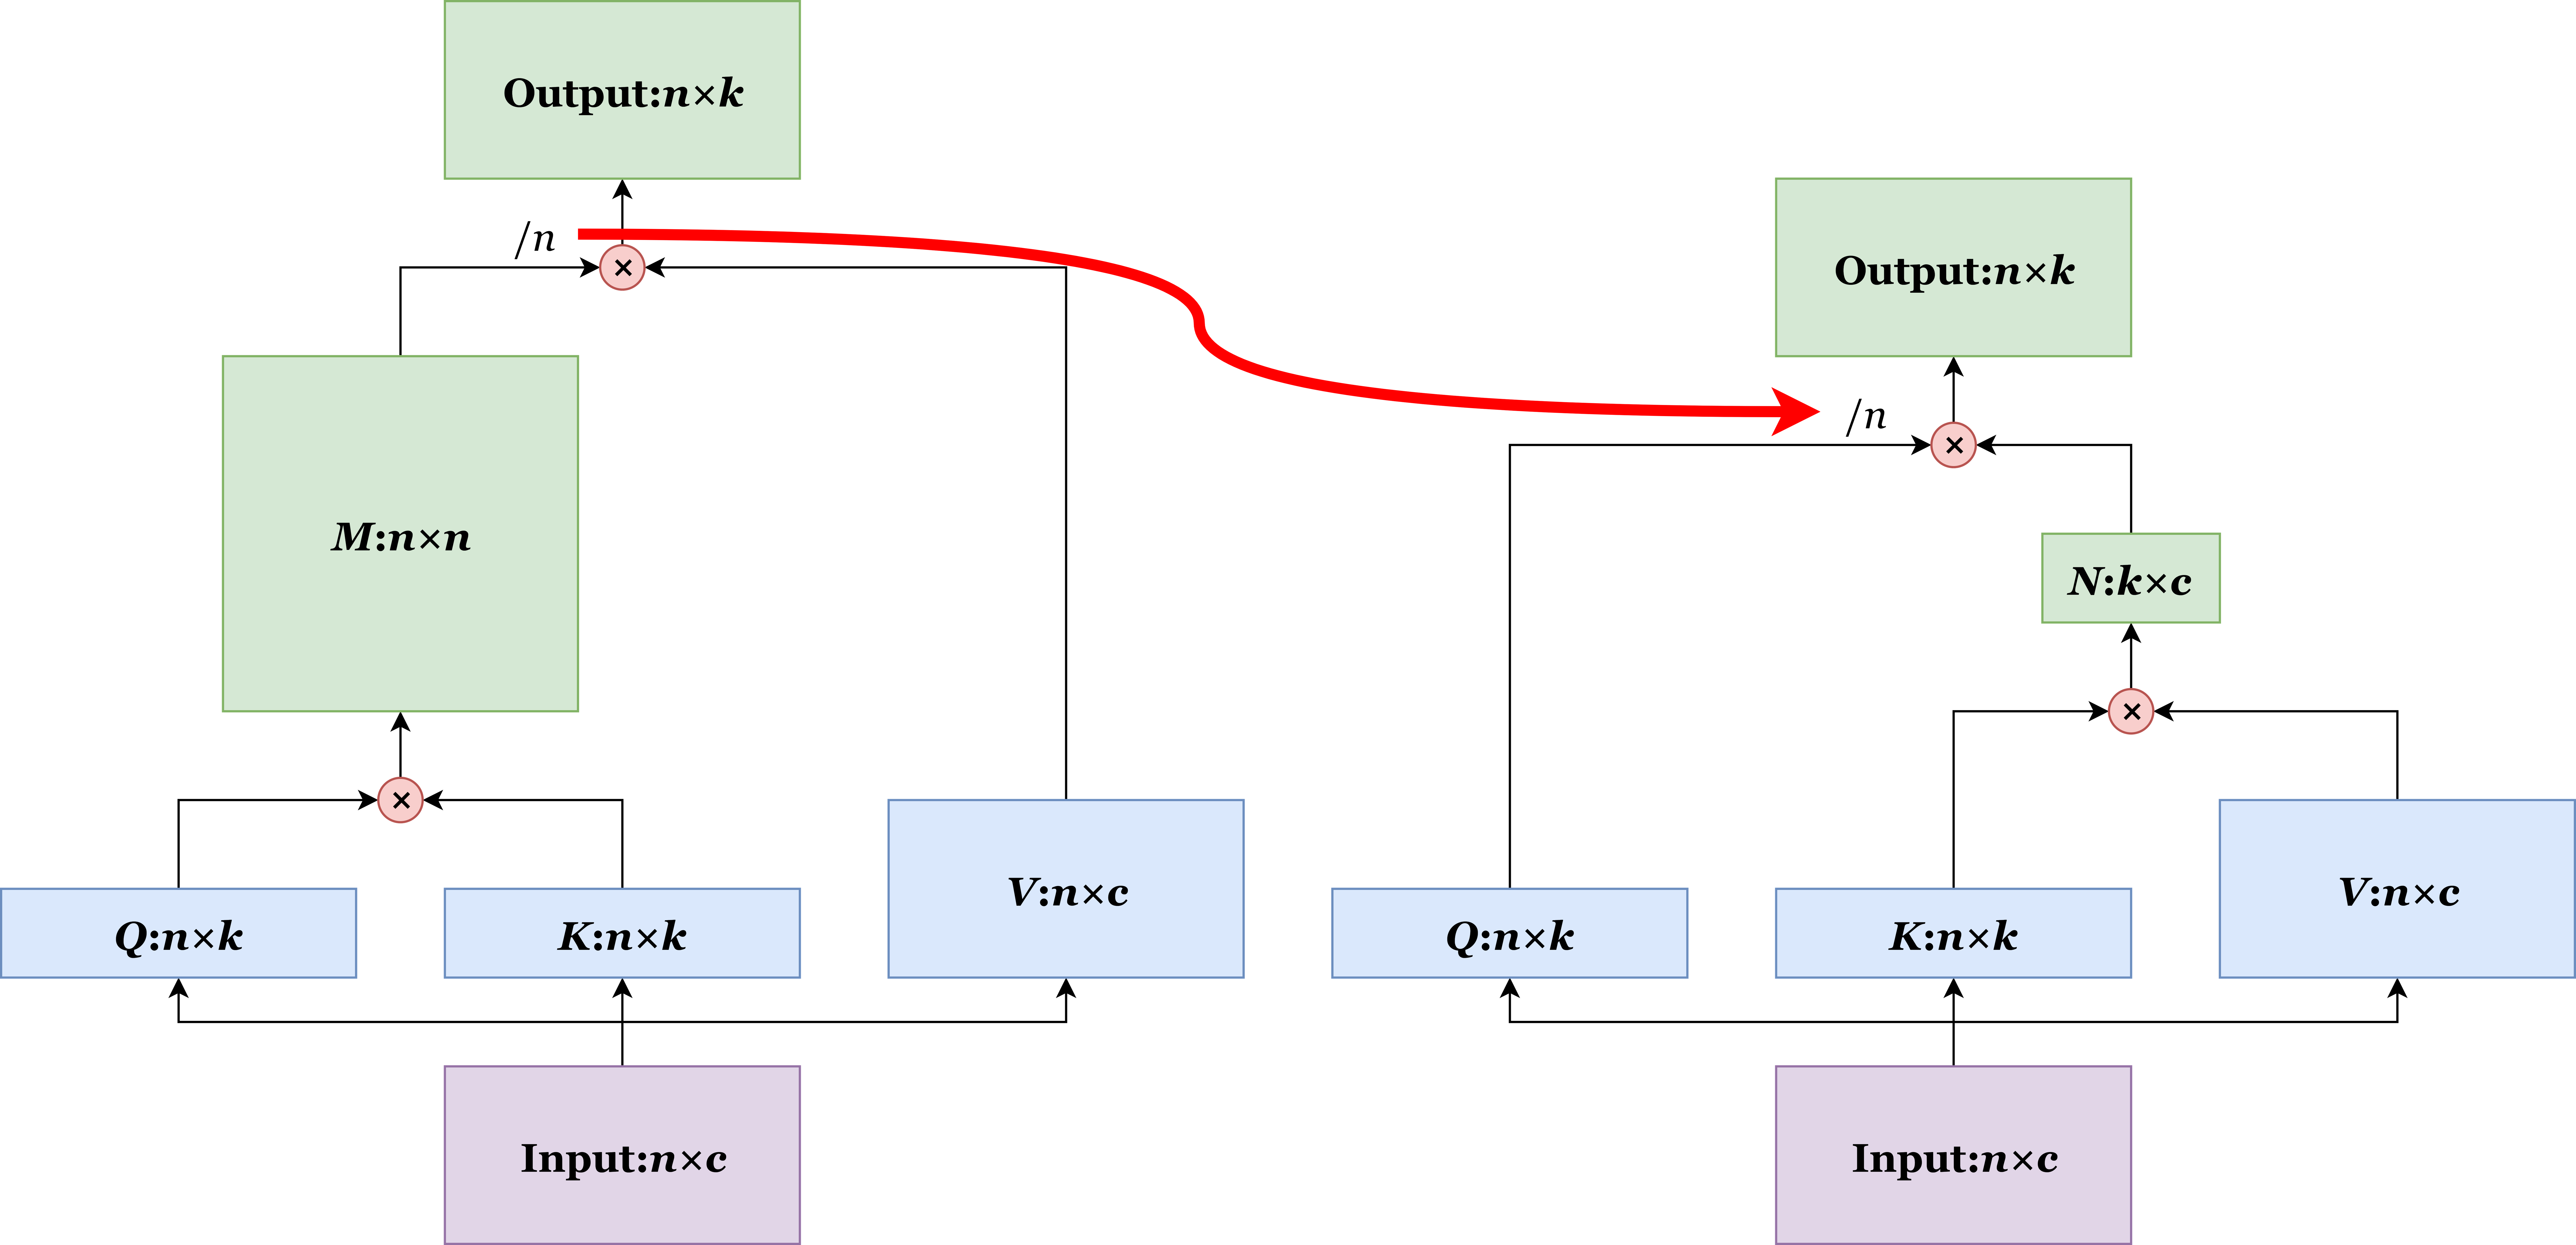 Illustration of the network architecture for efficient attention